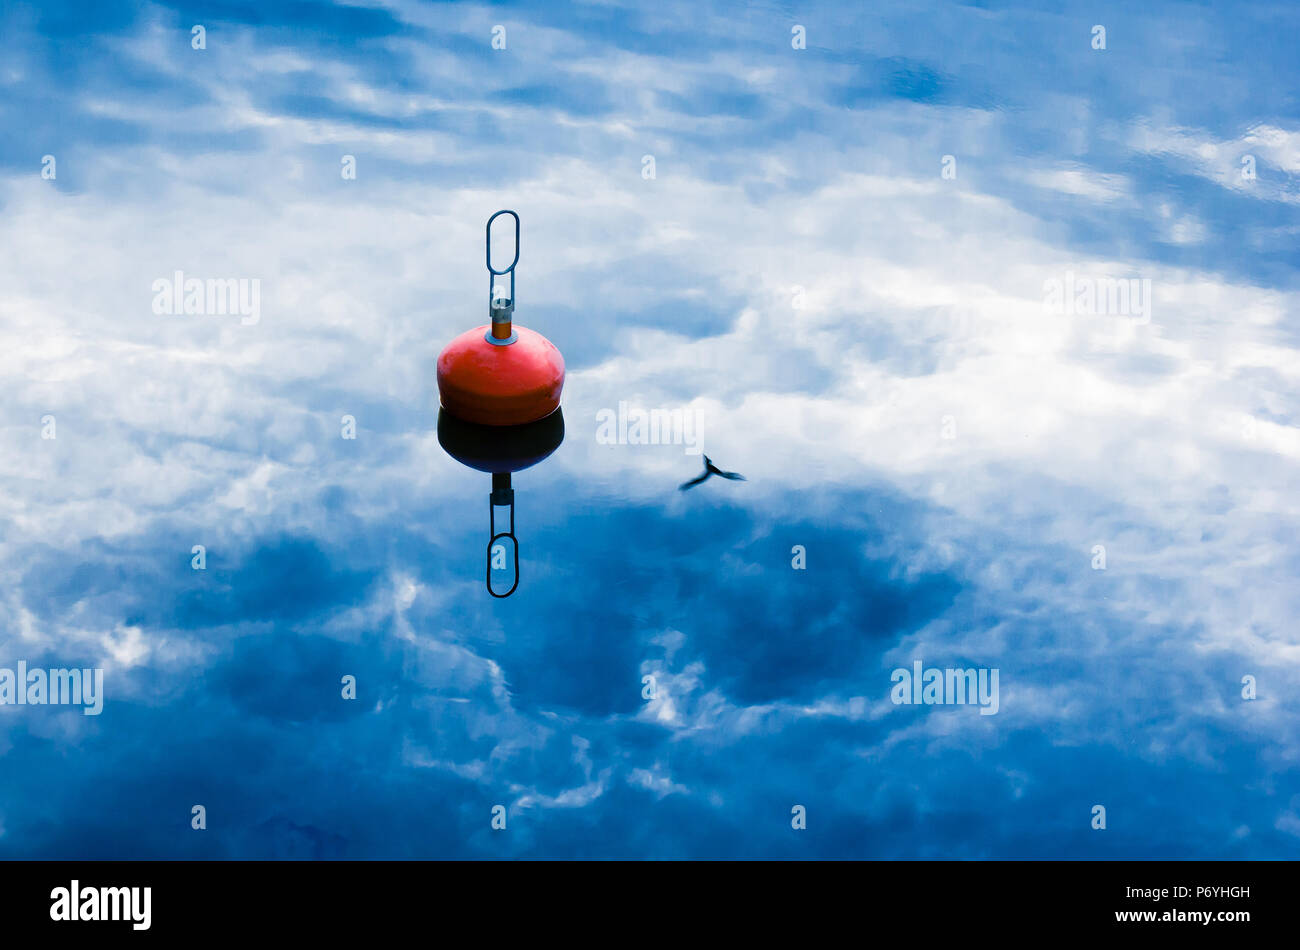 Red buoy floating on sea with reflection of the sky and flying bird Stock Photo